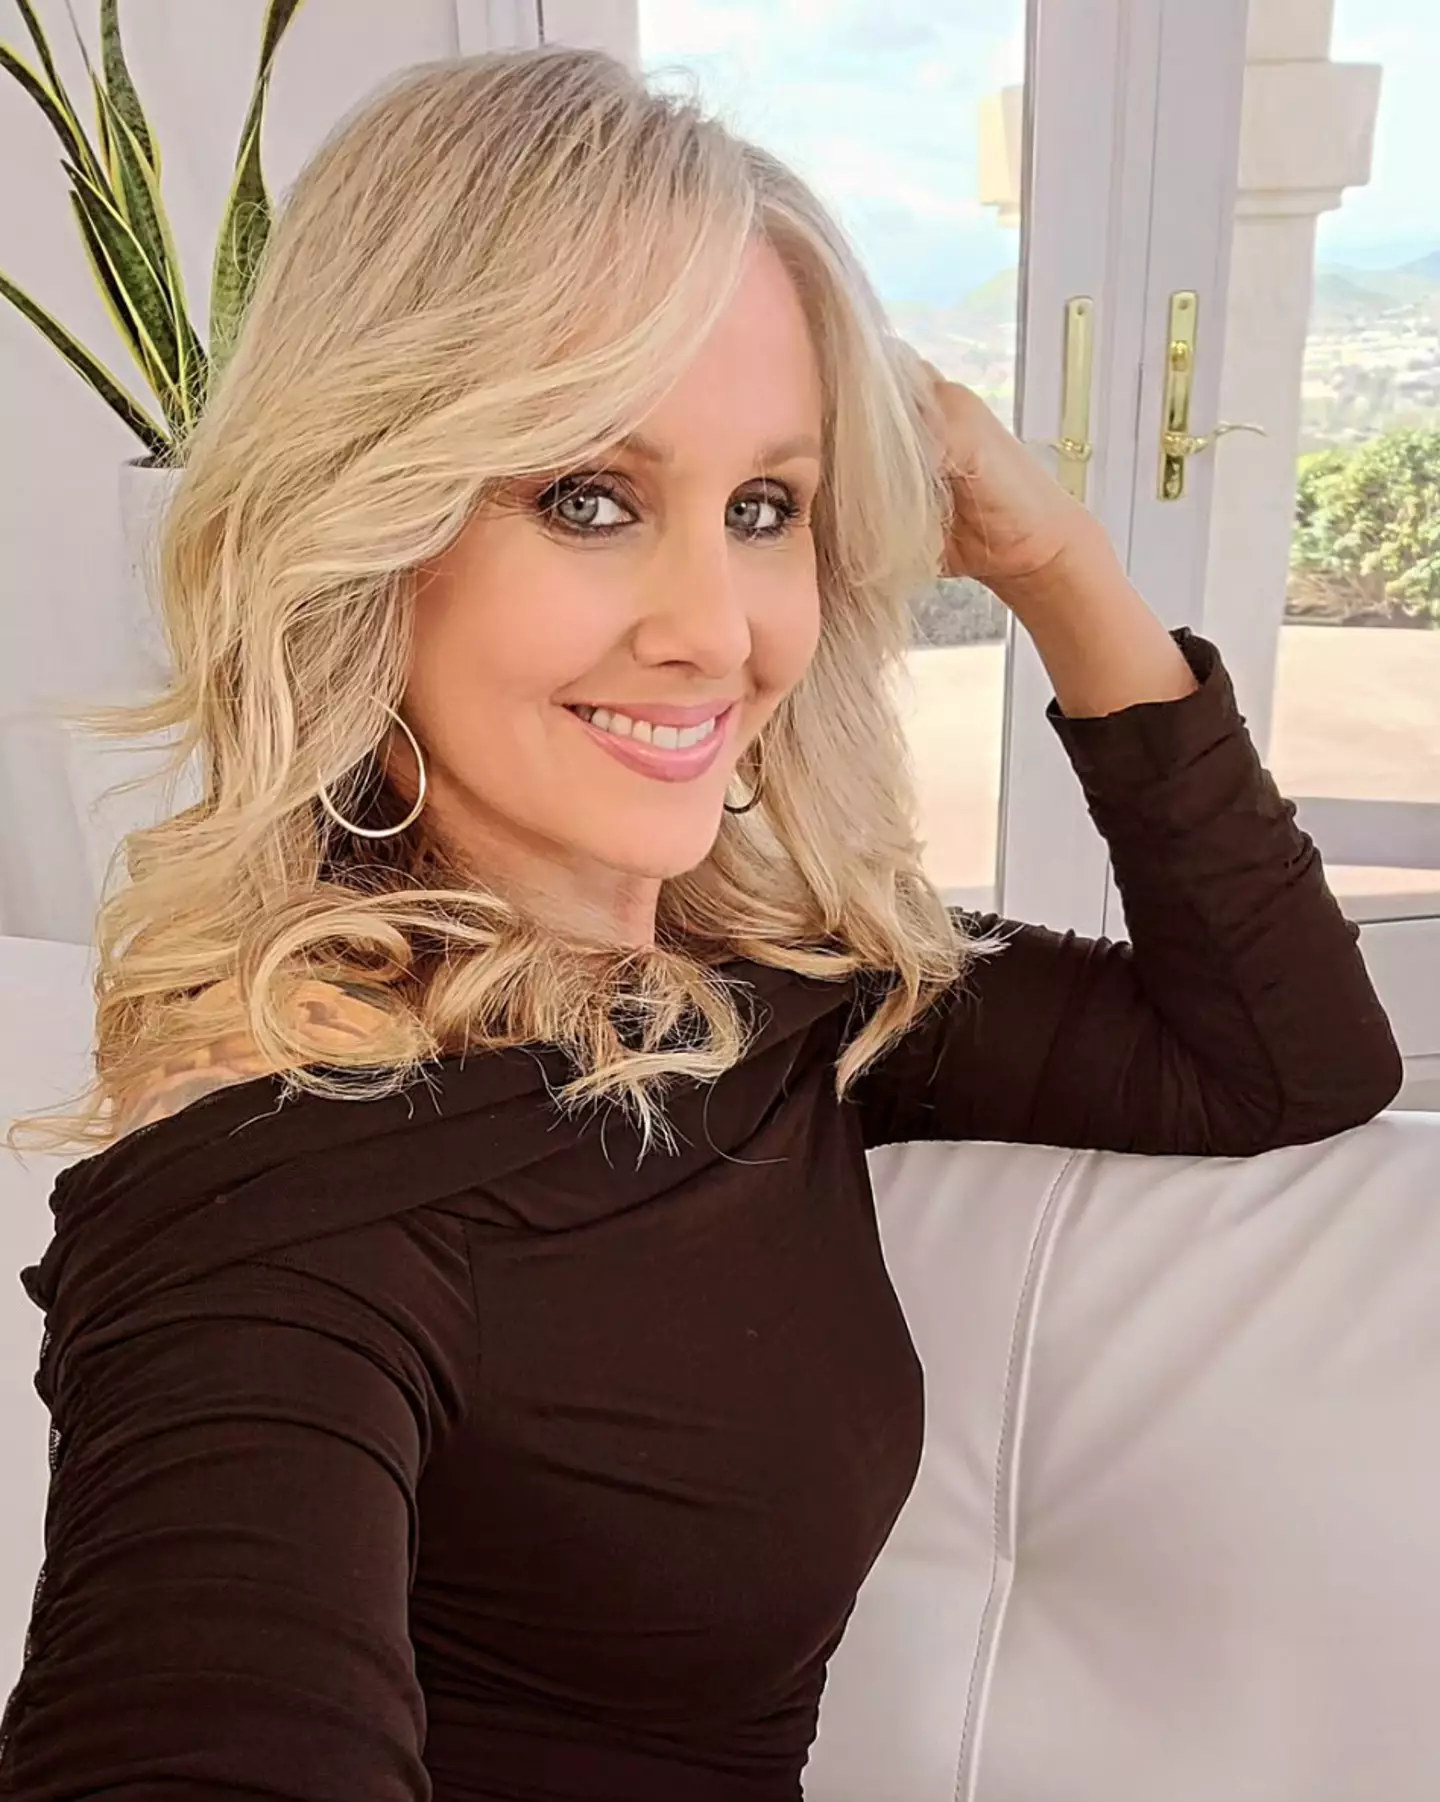 Adult film star Julia Ann has shared the reason she stopped filming with male colleagues (Instagram/@therealjuliaannlive)